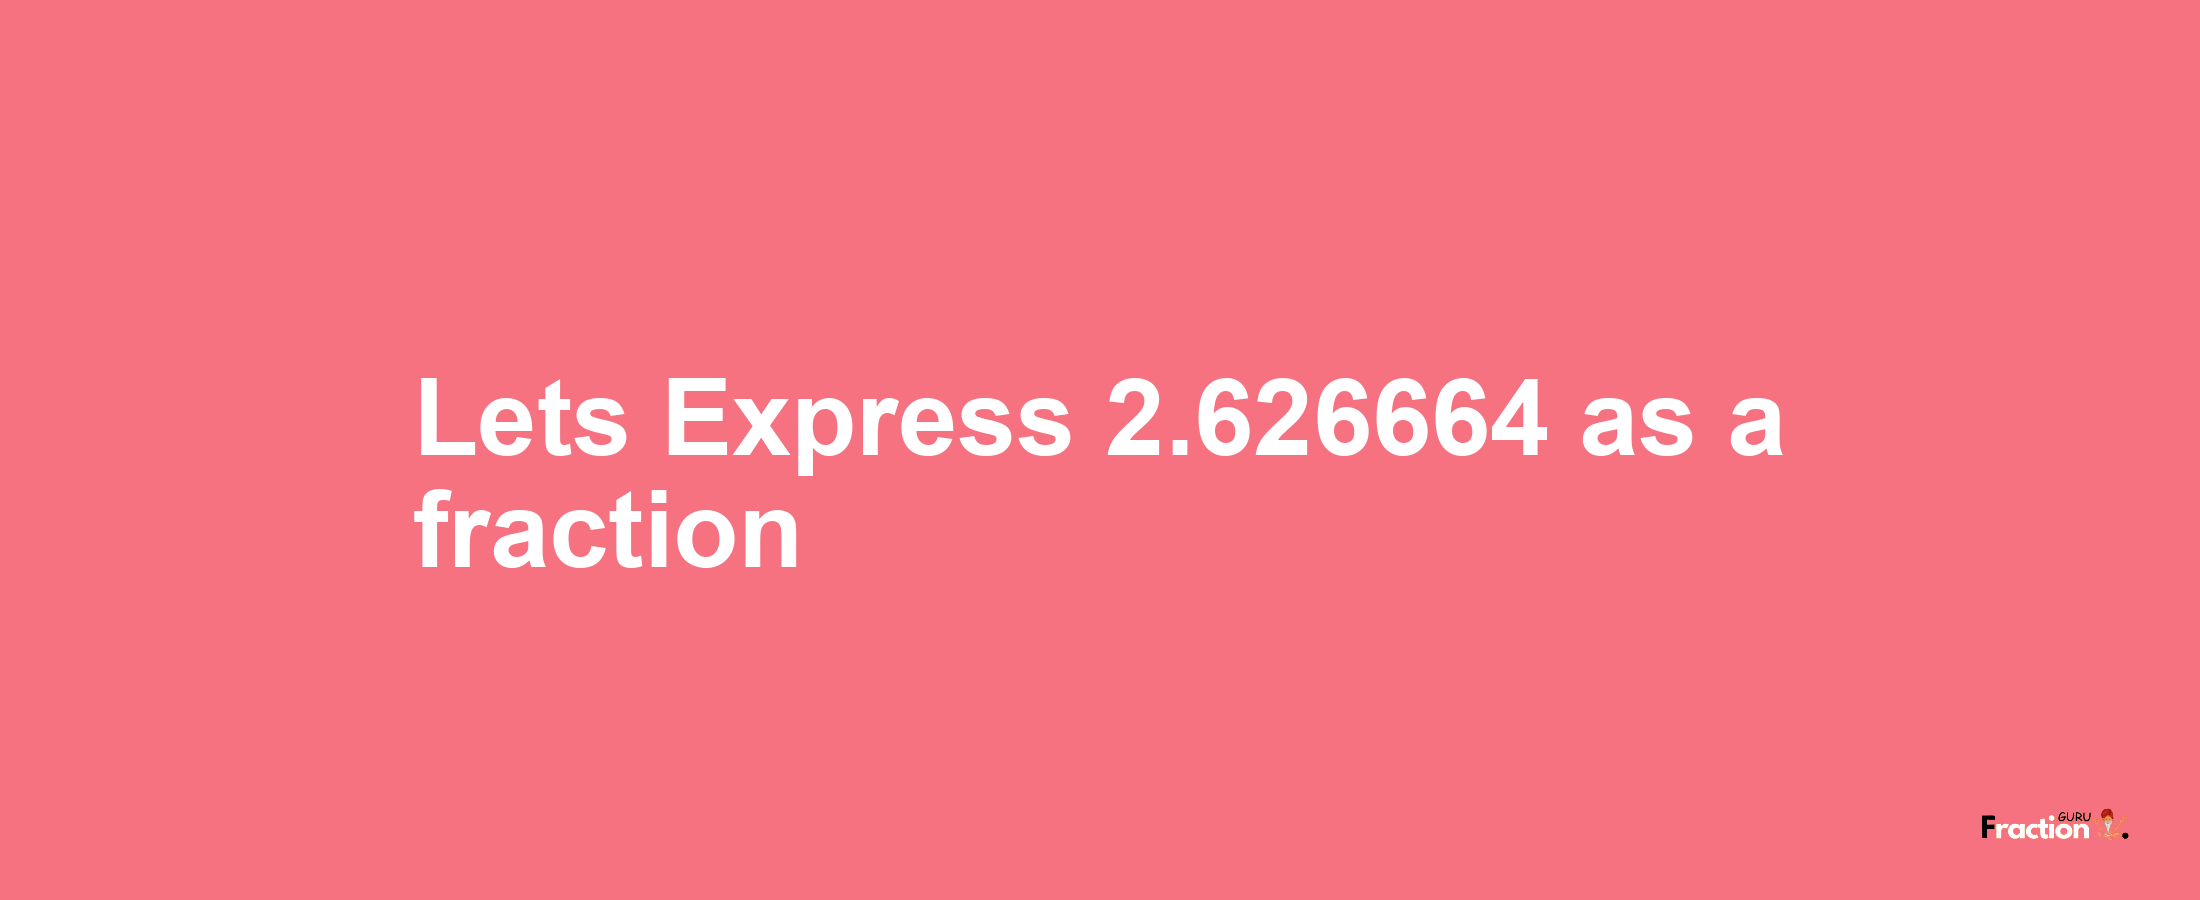 Lets Express 2.626664 as afraction